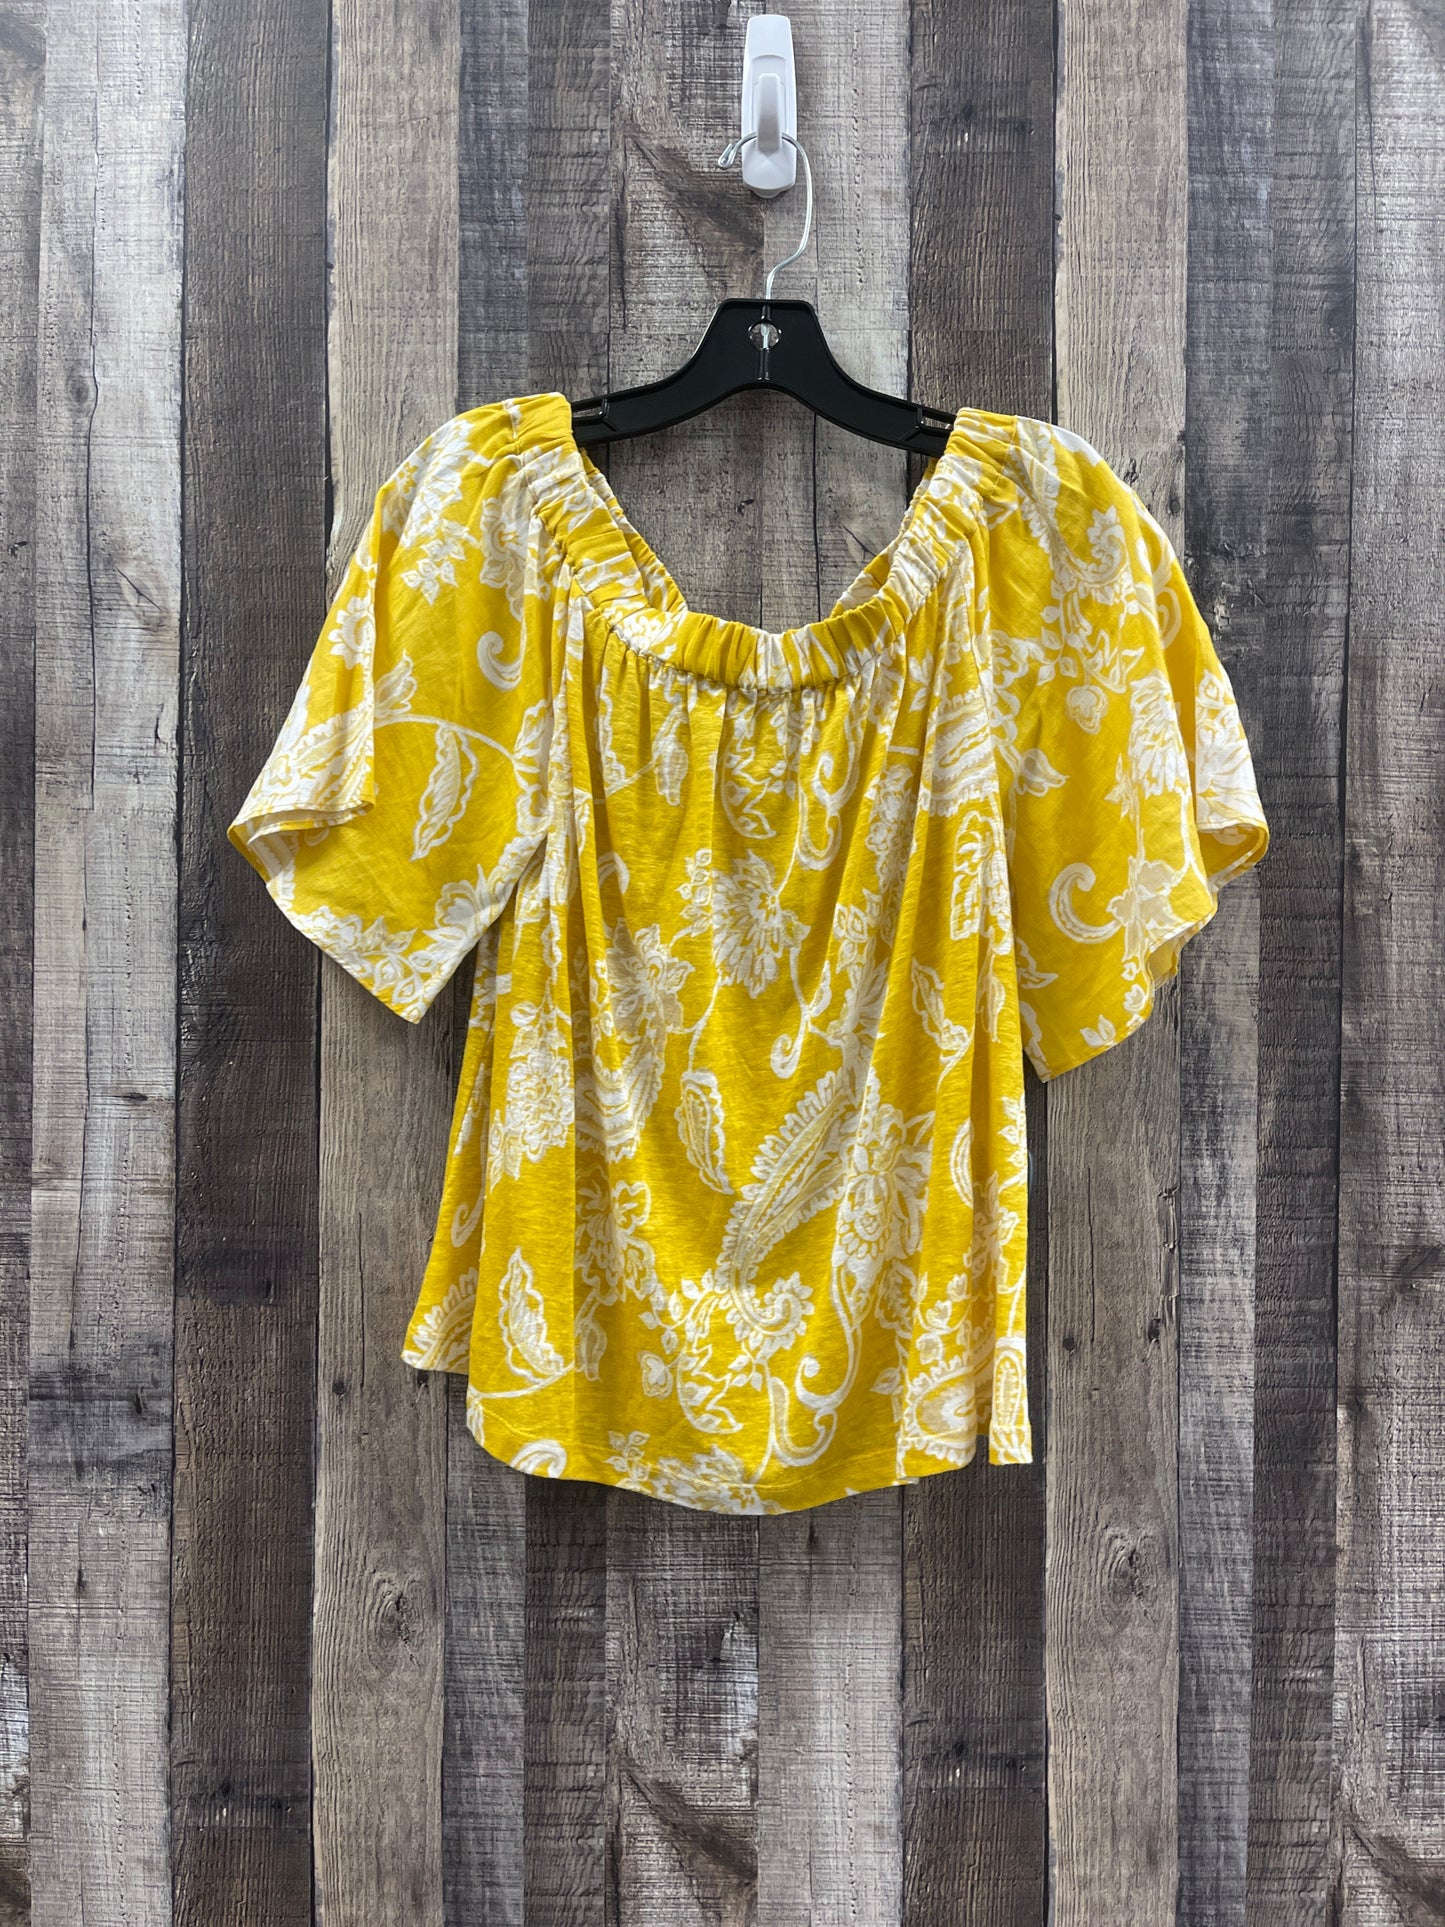 Yellow Top Short Sleeve Chicos, Size S